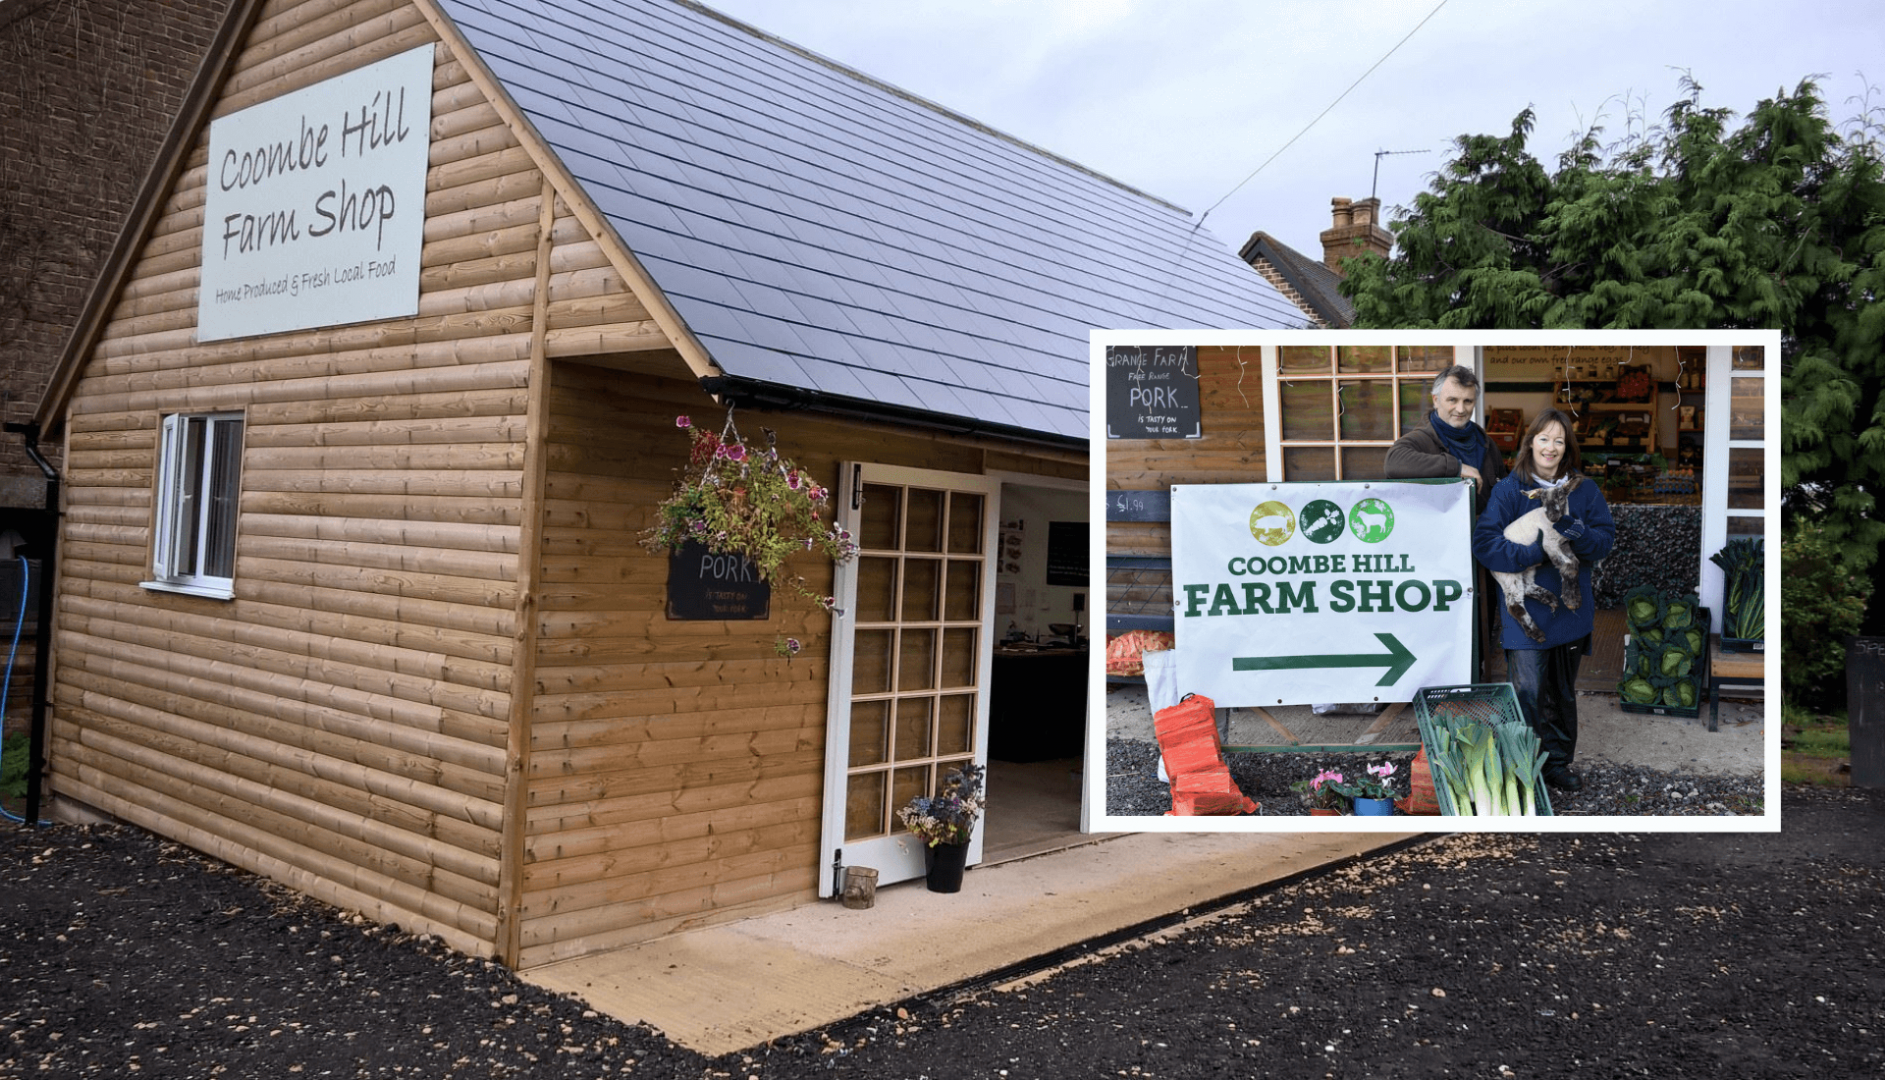 Coombe Hill Farm Shop in Tewkesbury